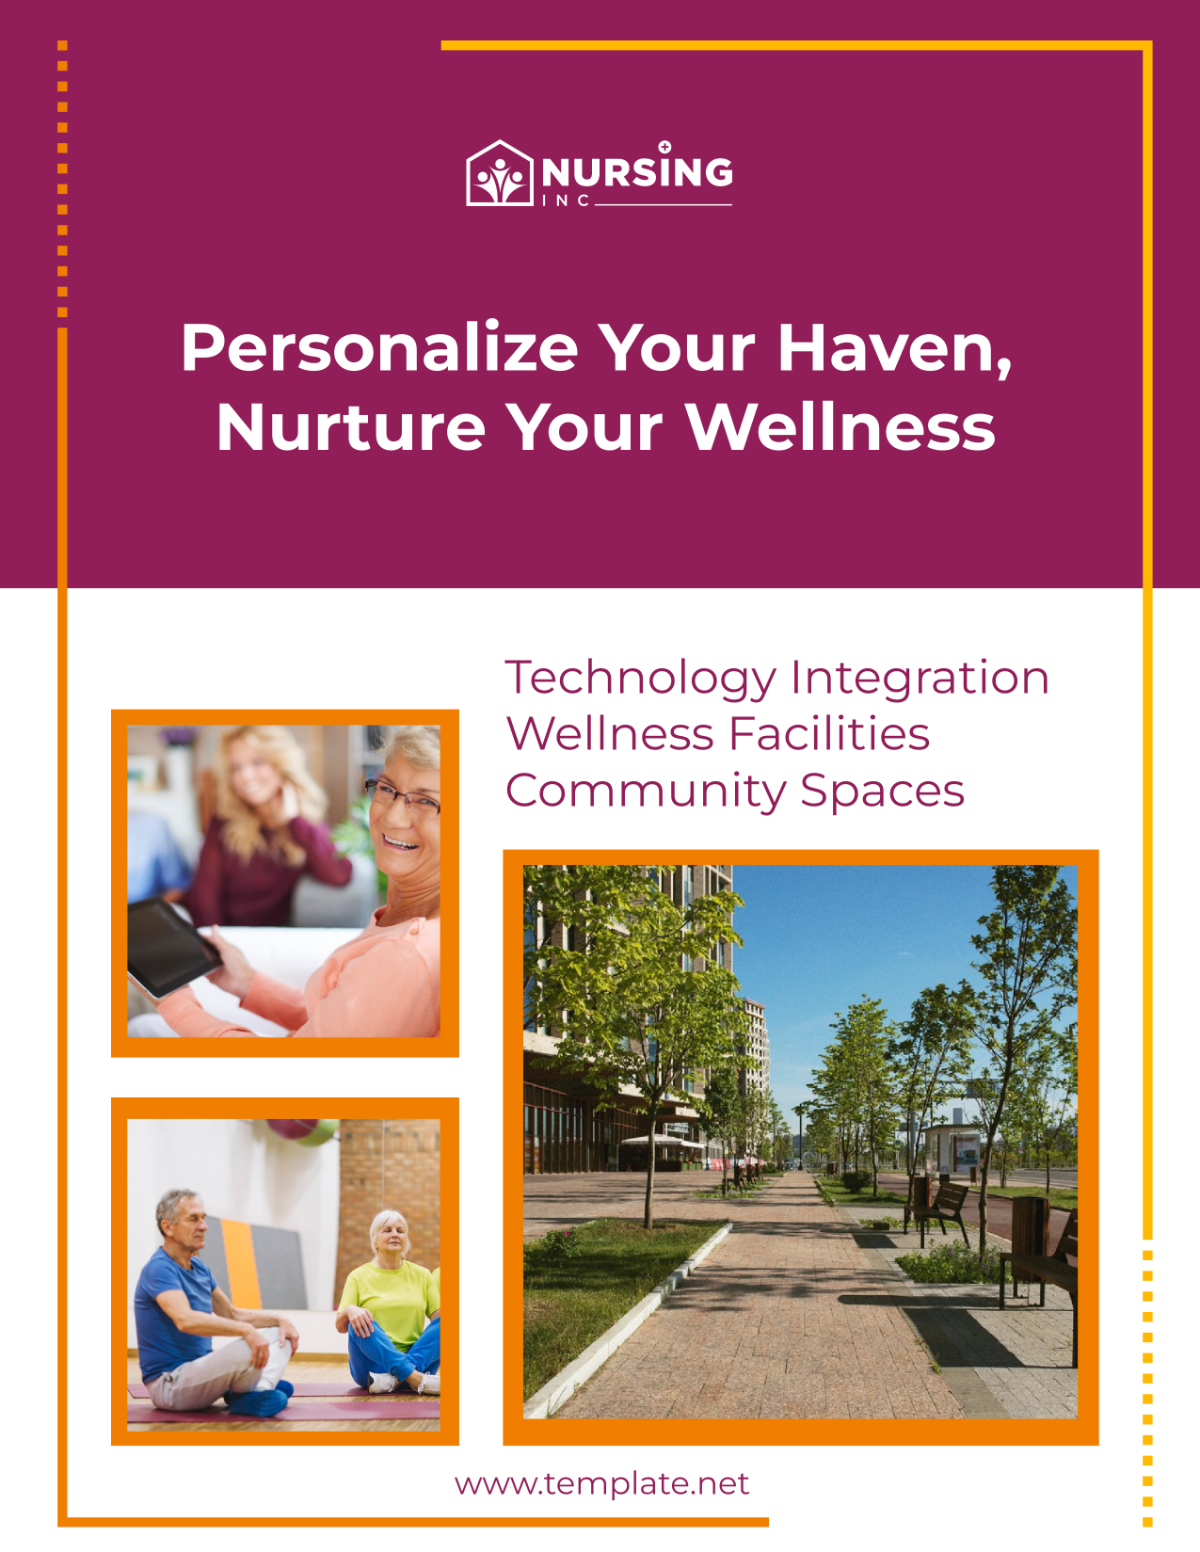 Customize Your Living Space: Options and Amenities Poster Template